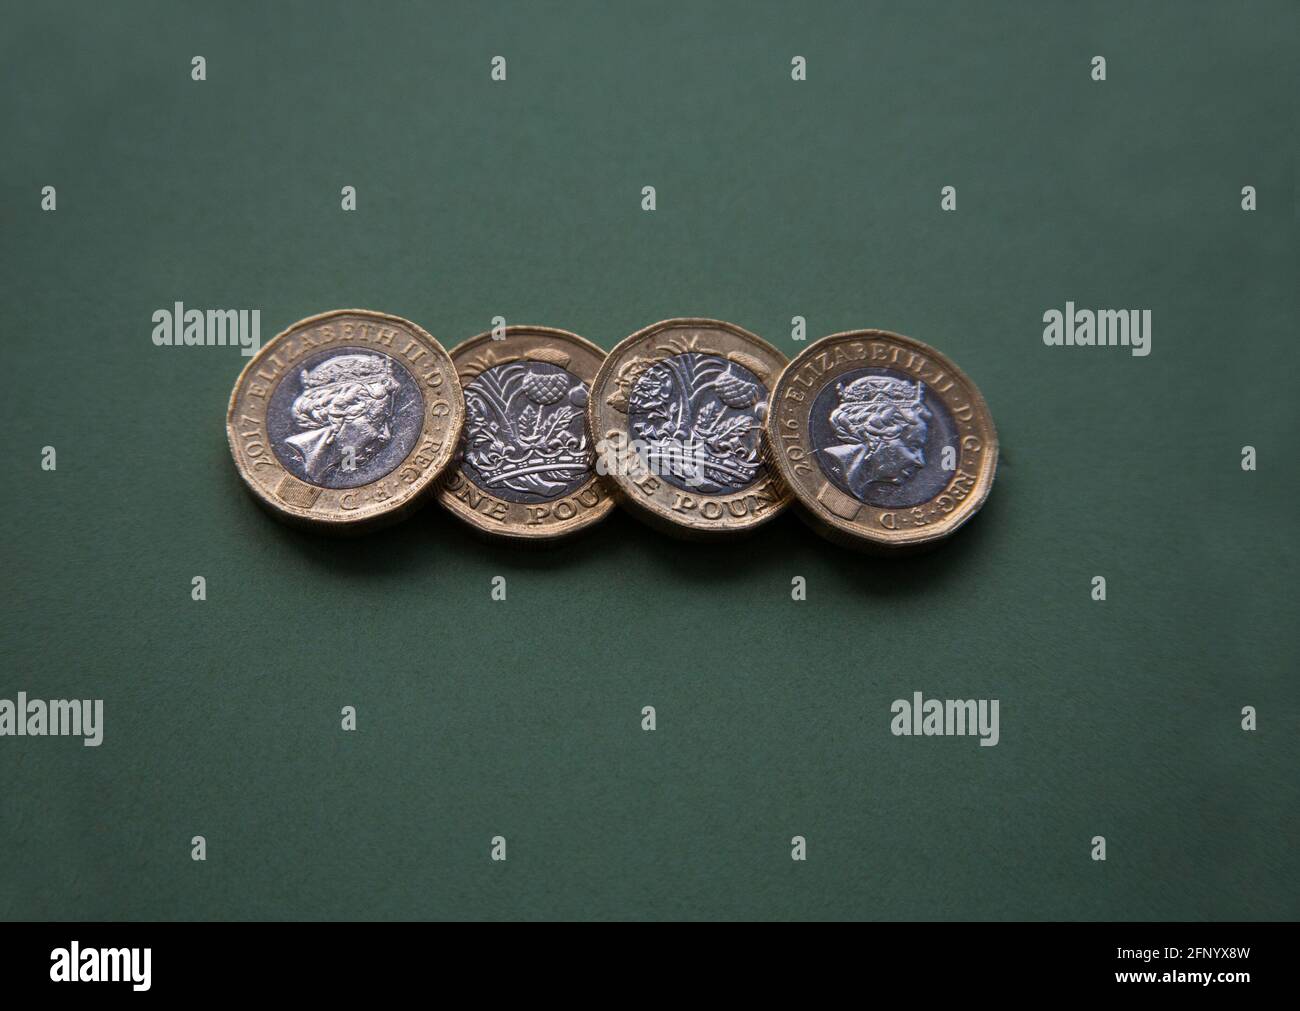 Four British sterling £1 coins in a row on green background Stock Photo